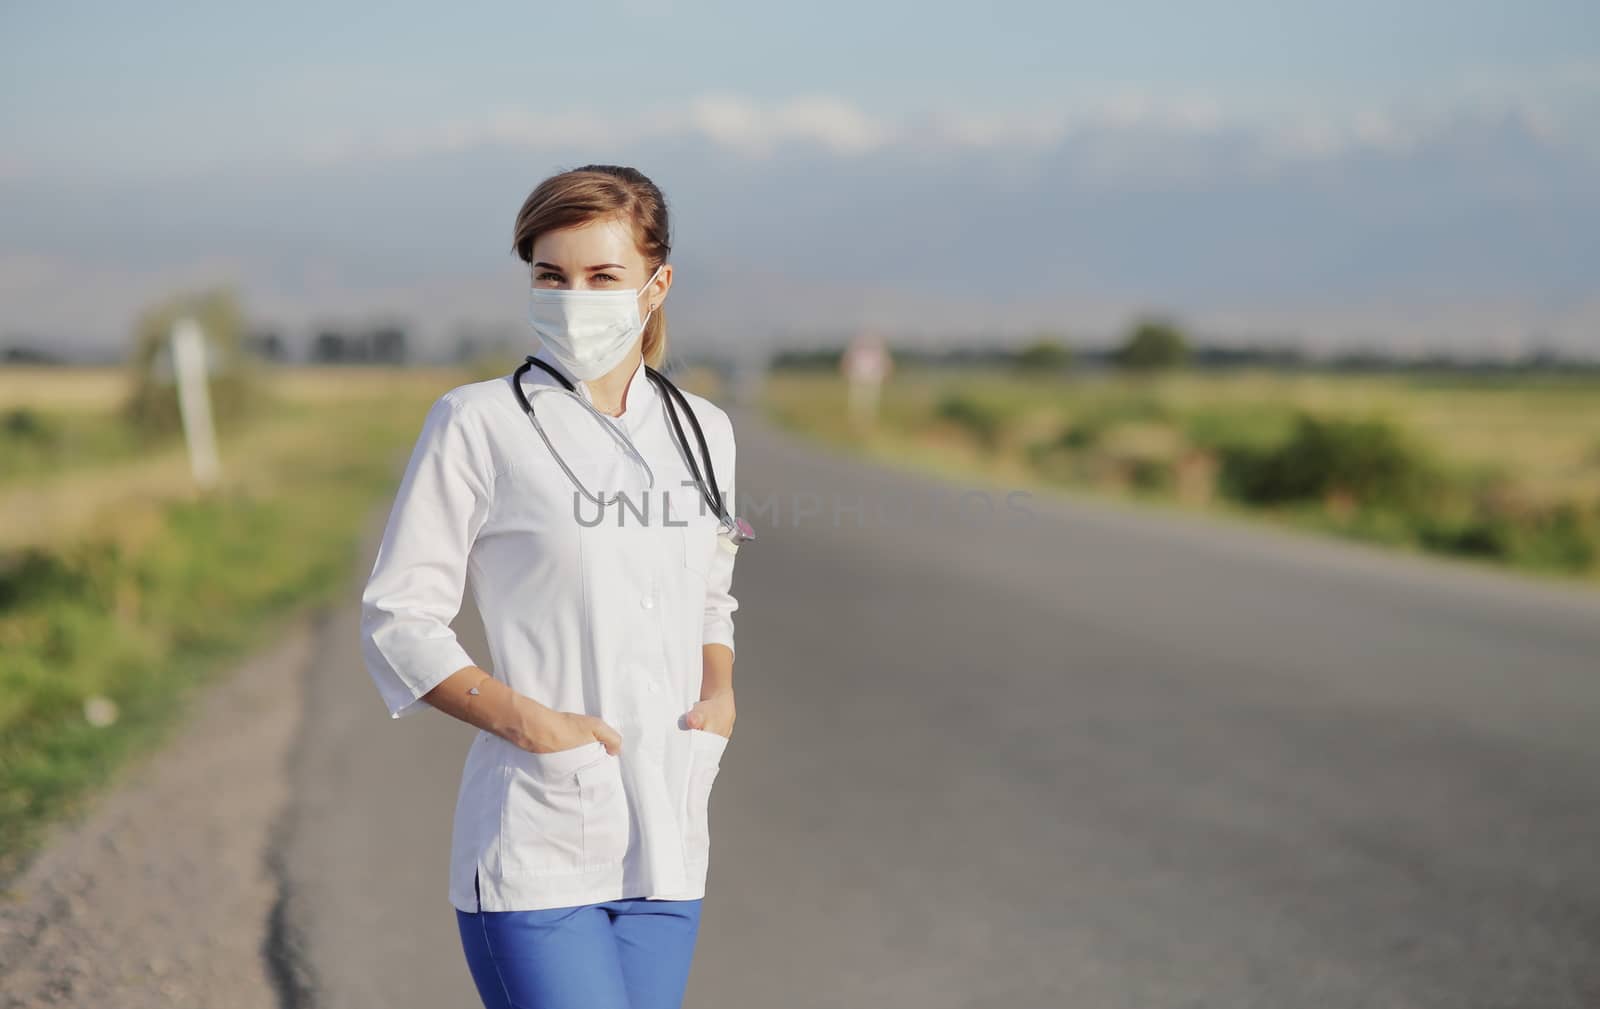 Female doctor or nurse wearing a protective face mask next to a rural road. by selinsmo